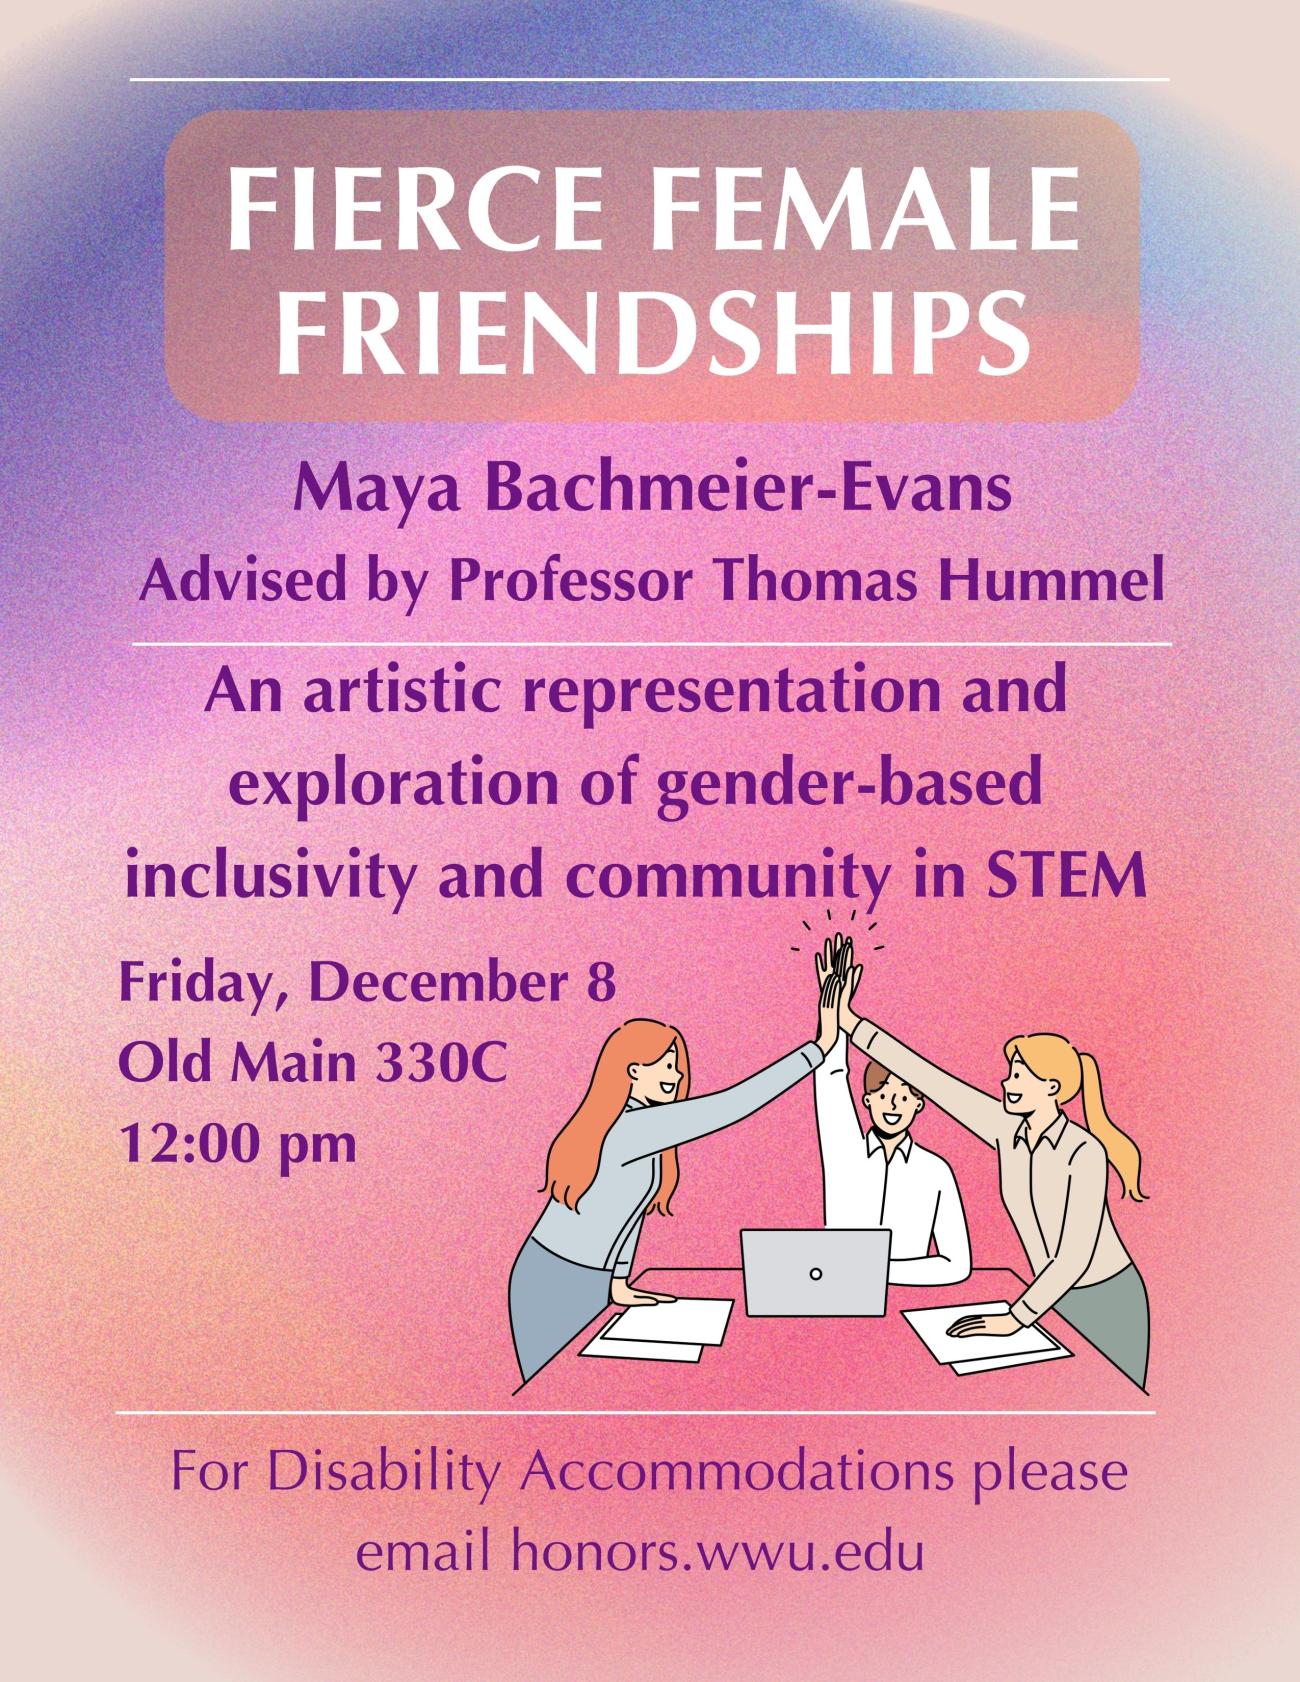 A poster with a pink, purple, and orange gradient background. In the bottom right corner, there is a cartoon of three women at a work desk sharing a cheery high five. The text reads "Fierce Female Friendships. Maya Bachmeier-Evans. Advised by Professor Thomas Hummel. An artistic representation and exploration of gender-based inclusivity and community in STEM. Friday, December 8. Old Main 330C. 12:00 PM. For Disability Accommodations please email honors.wwu.edu".